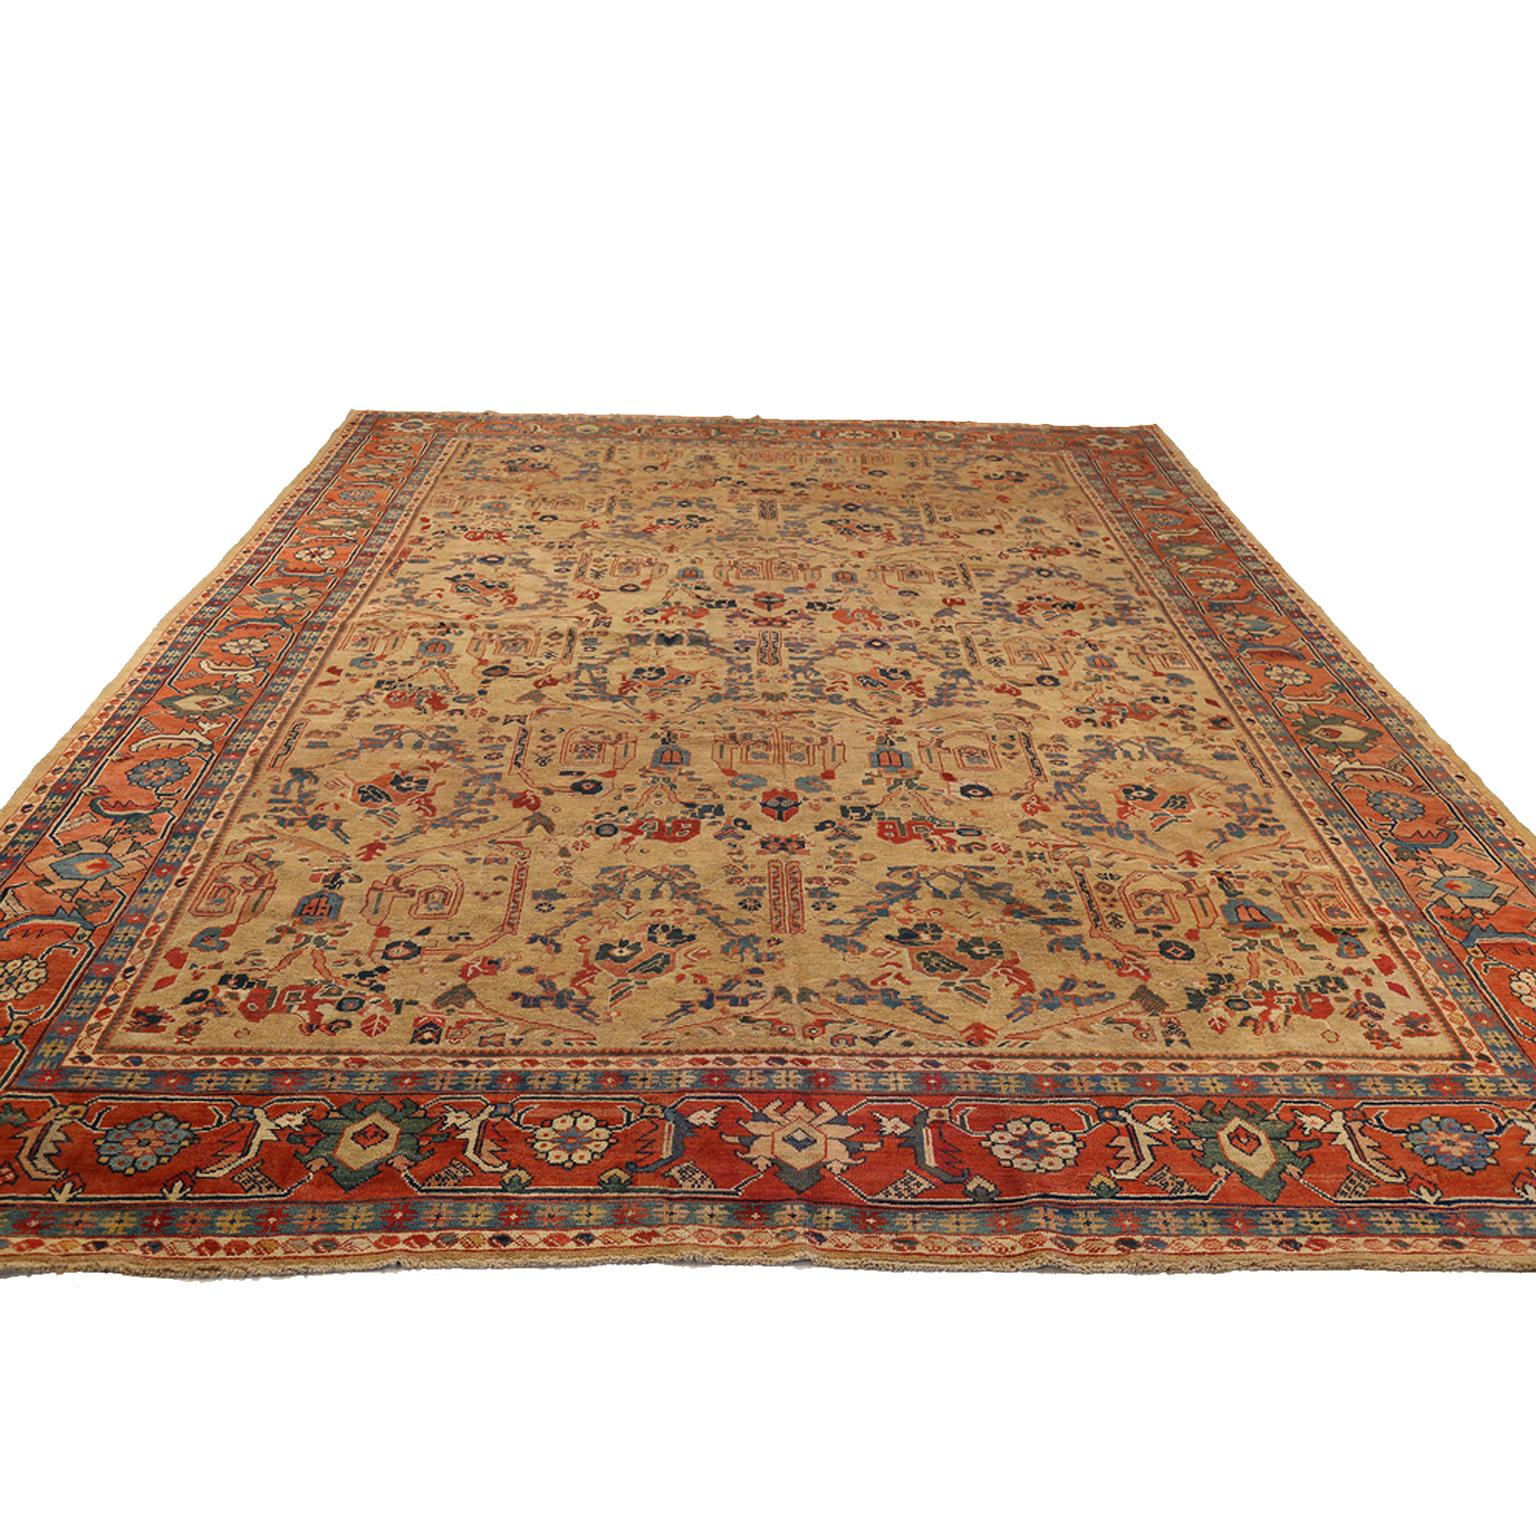 1930s-era antique Persian rug handwoven from exquisite wool and colored with rich organic dyes from vegetables and plants. It features an all-over design pattern of flowers, diamonds, and scarab elements made popular by weavers from the Sultanabad